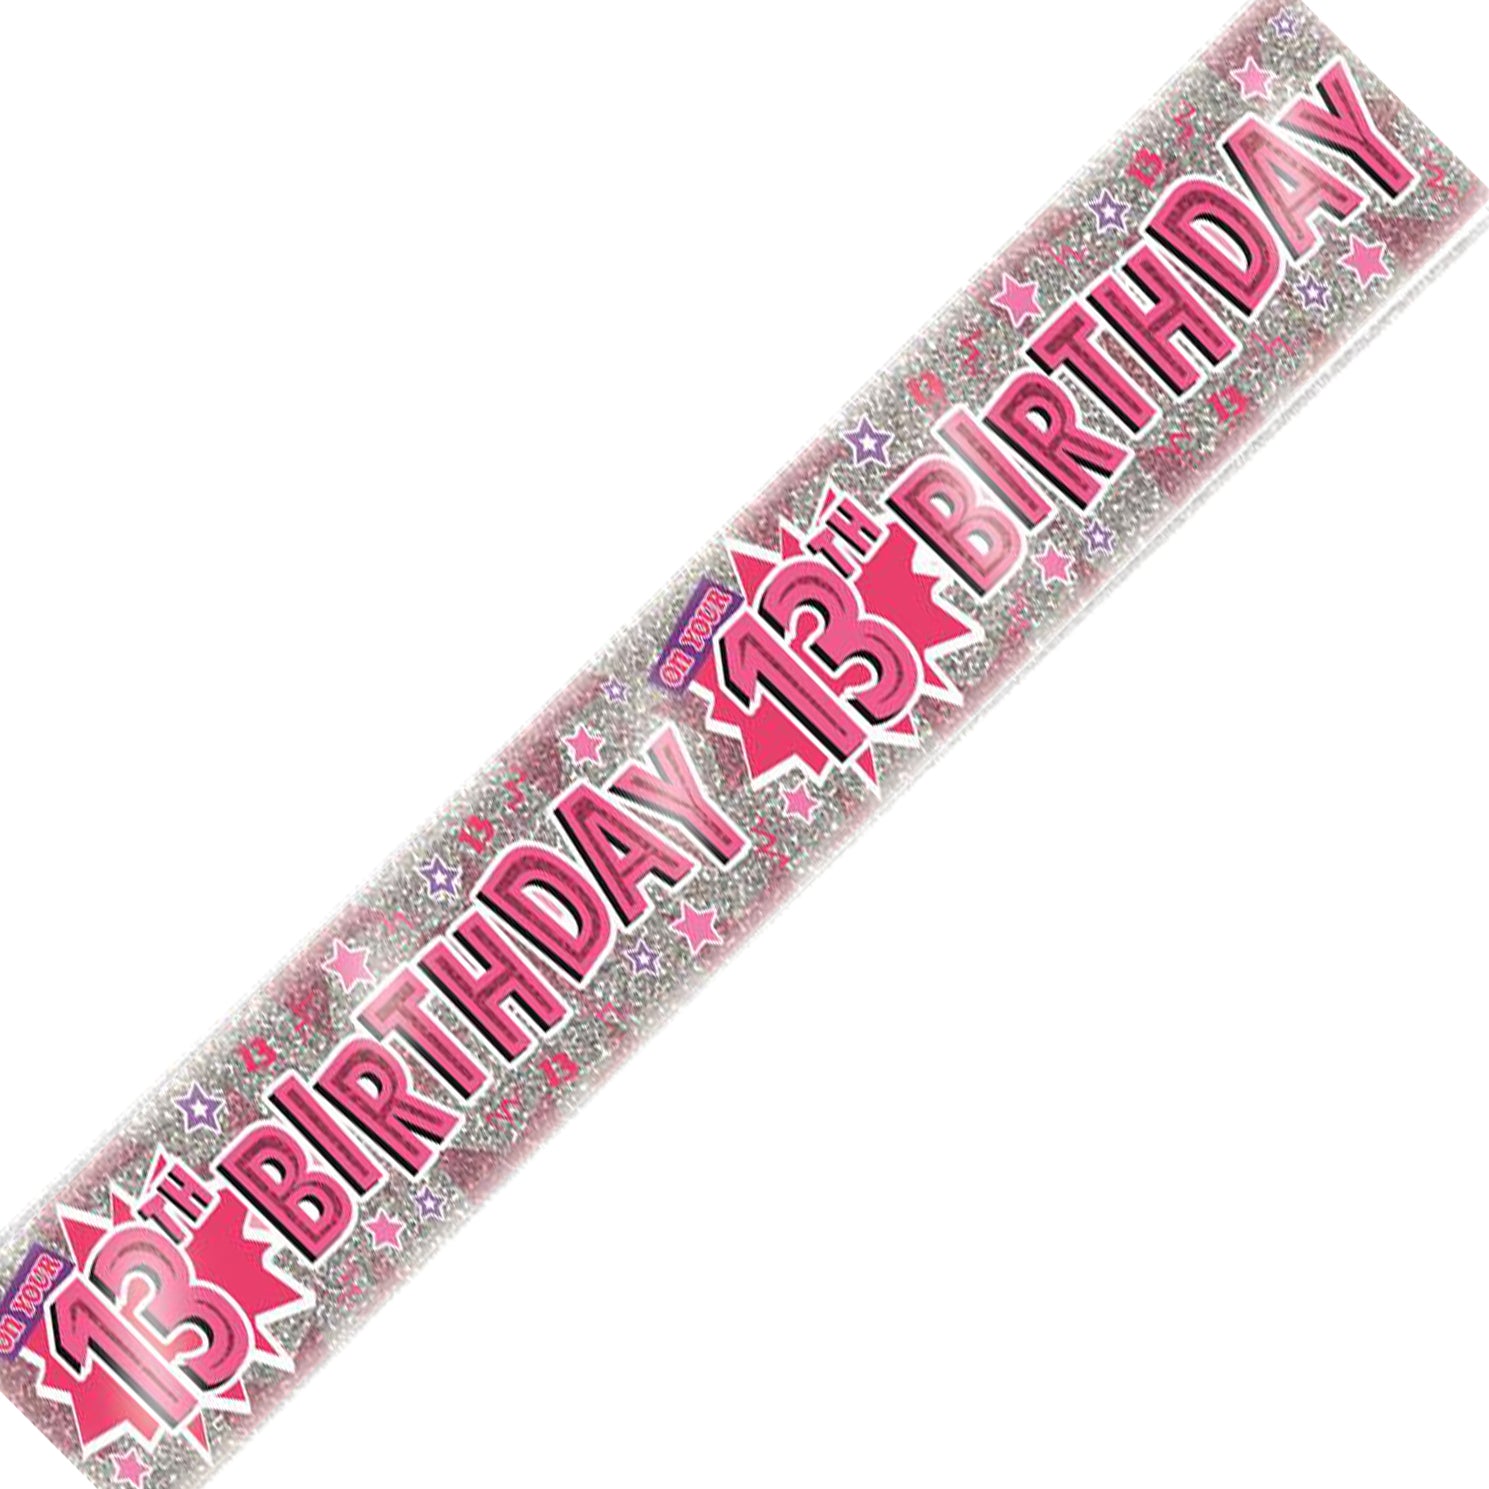 Age 13 Birthday Banner Pink And Silver Holographic Recyclable 13th Birthday Party Banner